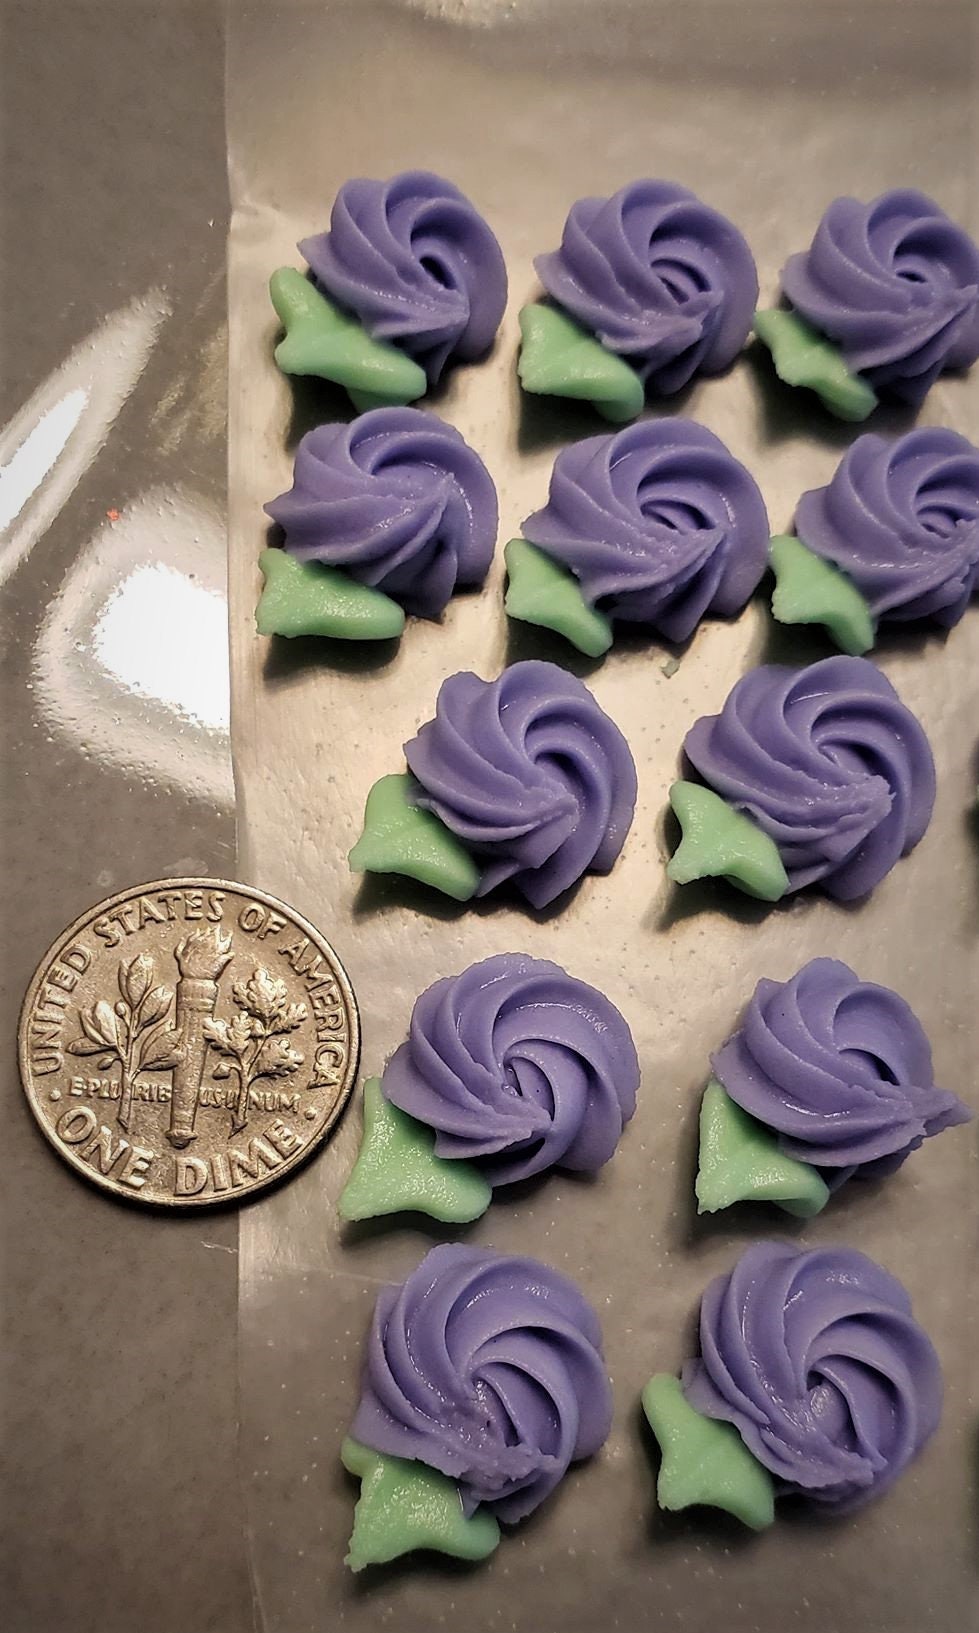 Royal Icing Recipe, The Perfect Royal Icing Recipe, Bonus Tutorial, How to Make Royal Icing Flowers